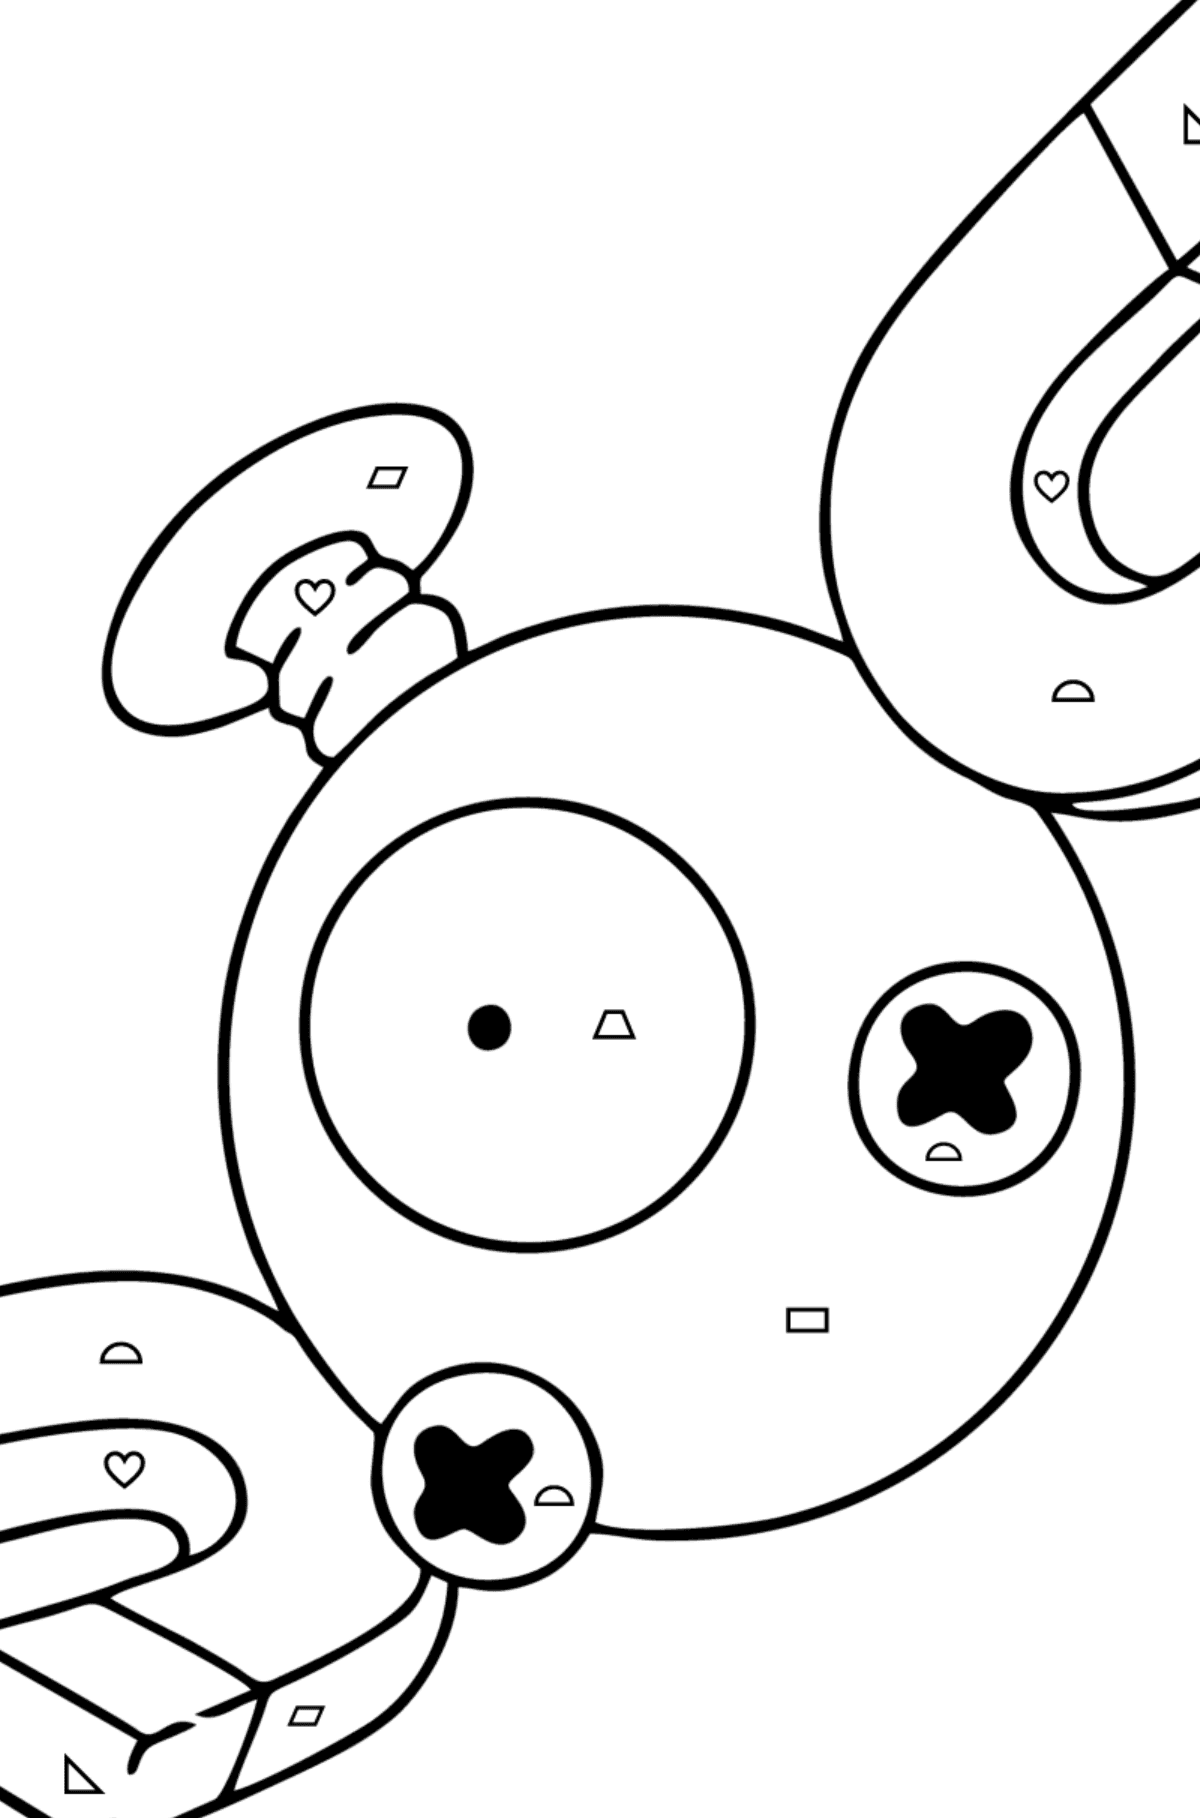 Coloring page Pokémon Go Magnemite - Coloring by Geometric Shapes for Kids